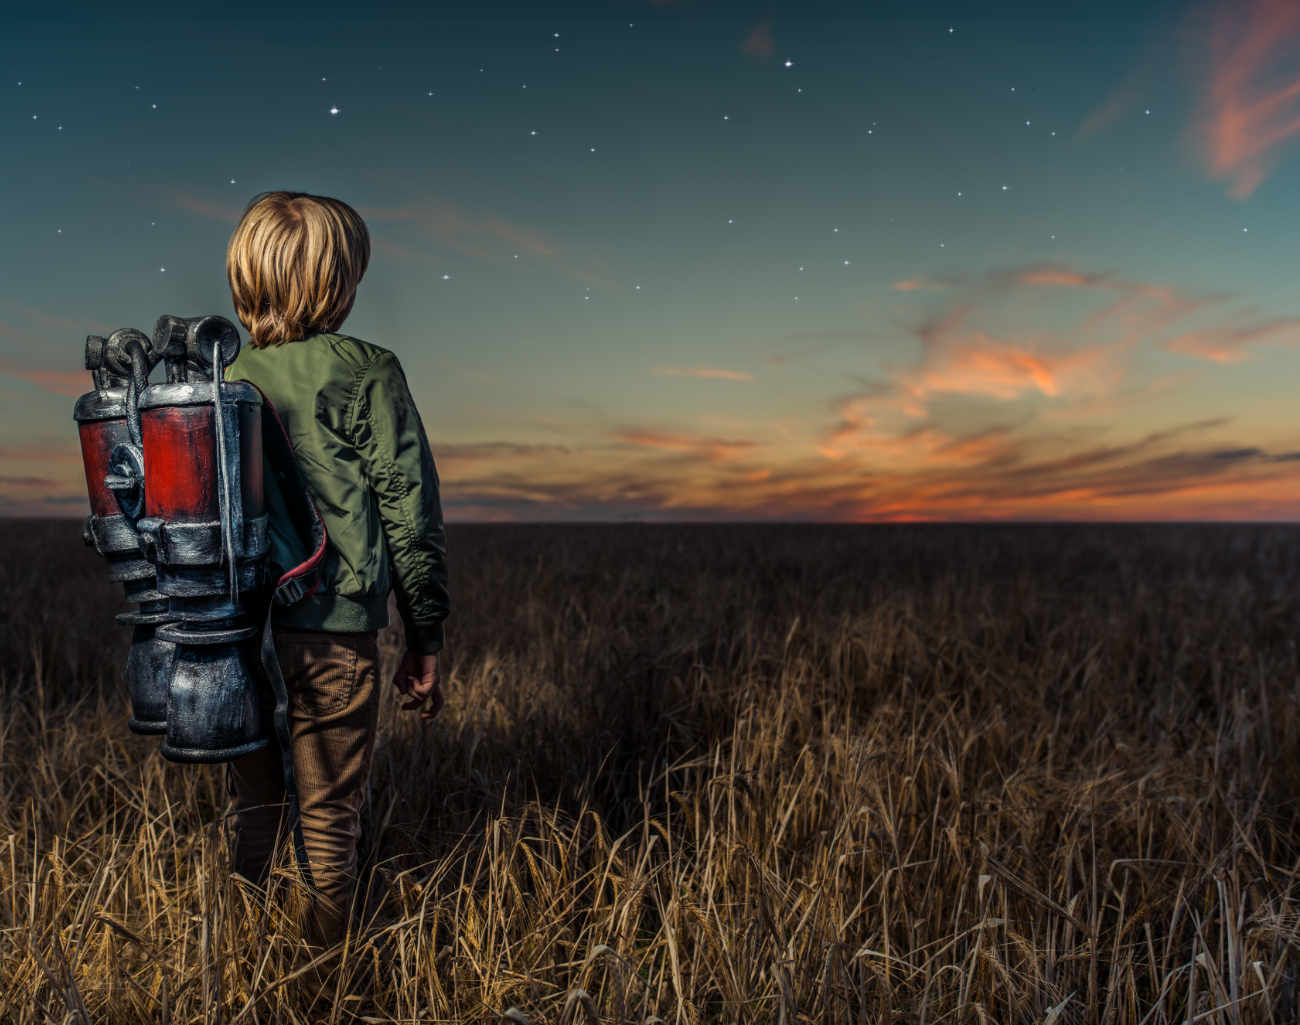 Creative marketing vs marketing data - image of boy in field with backpack